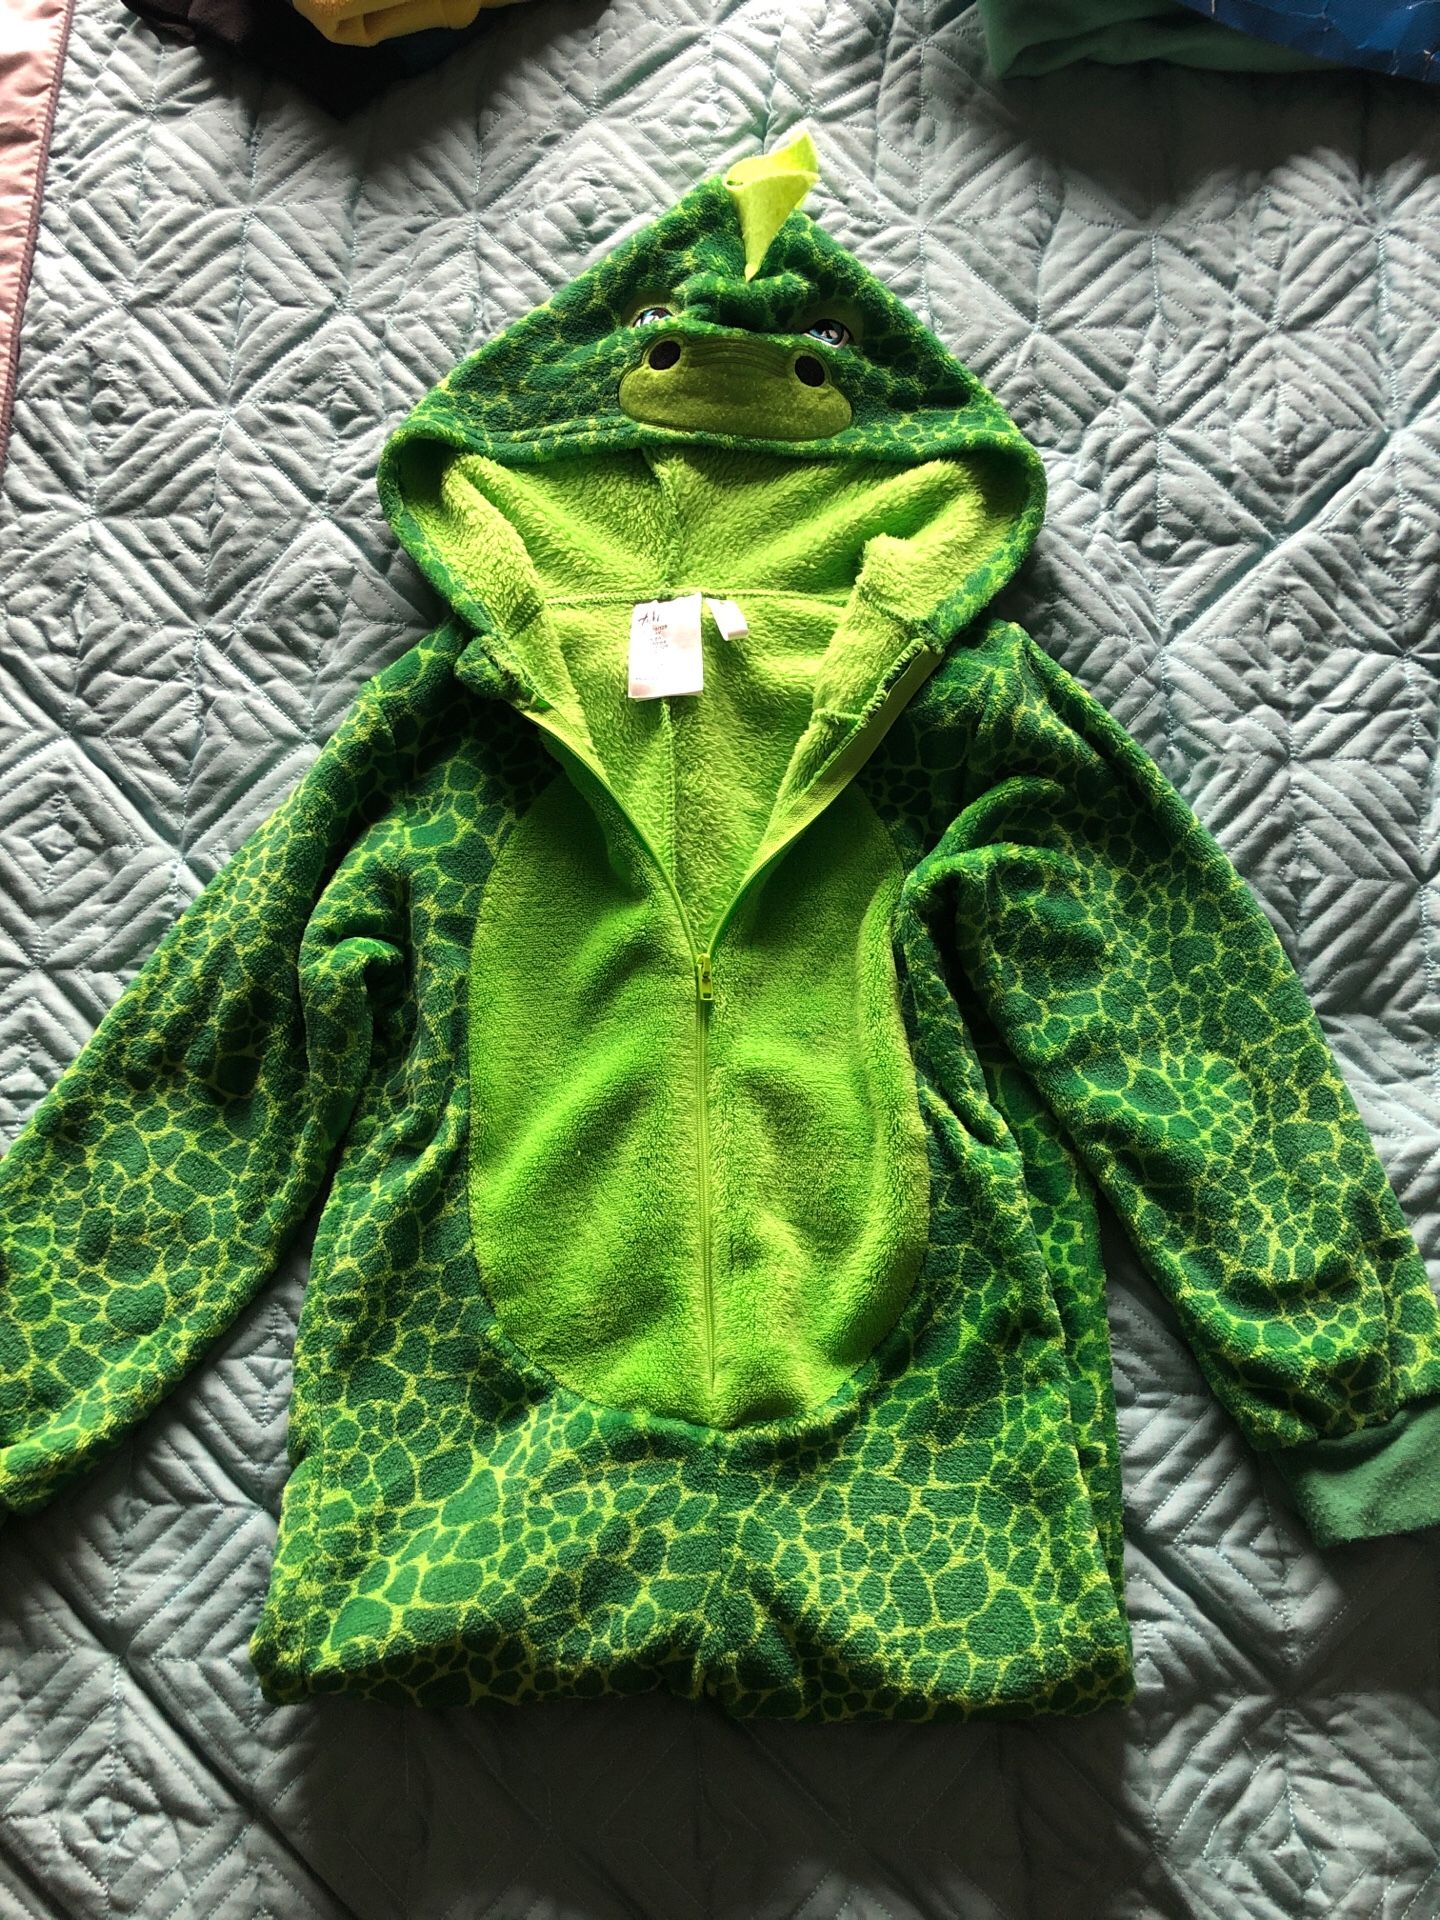 Gently used h&m dragon/dinosaur Halloween costume for boys. Cozy soft green material